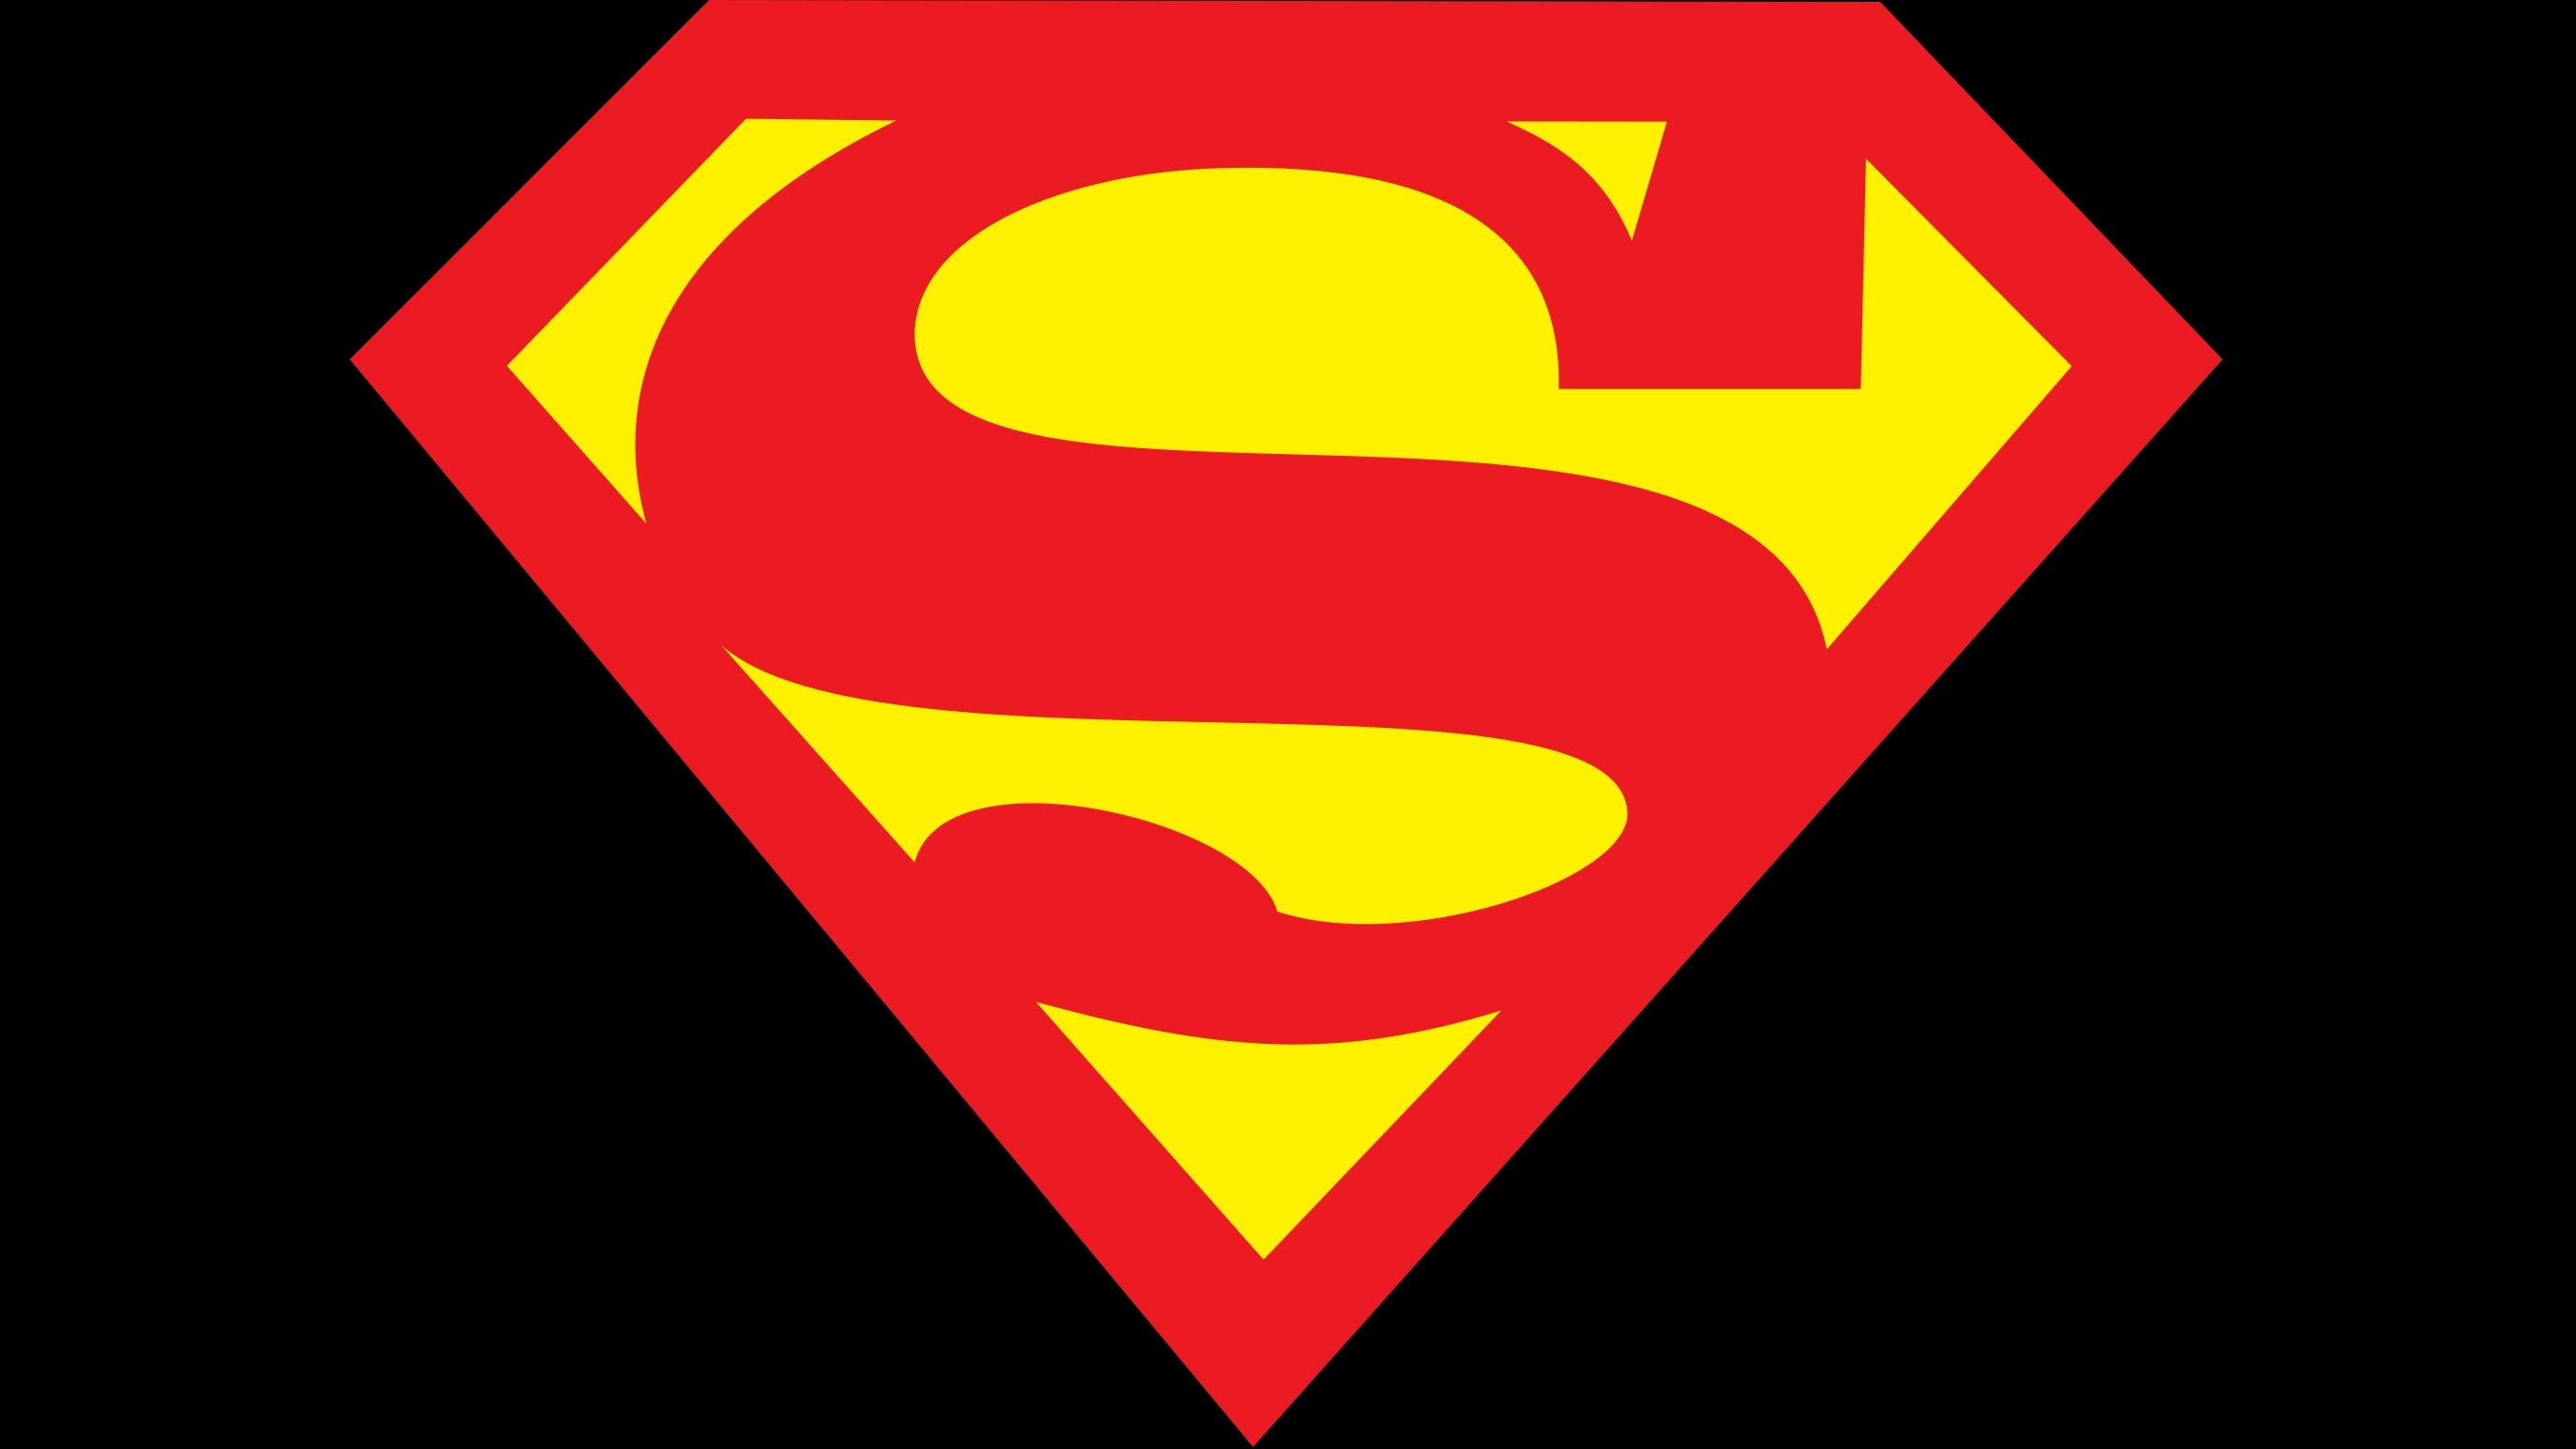 Awesome Superman Logo 3d Wallpaper | Download wallpapers page